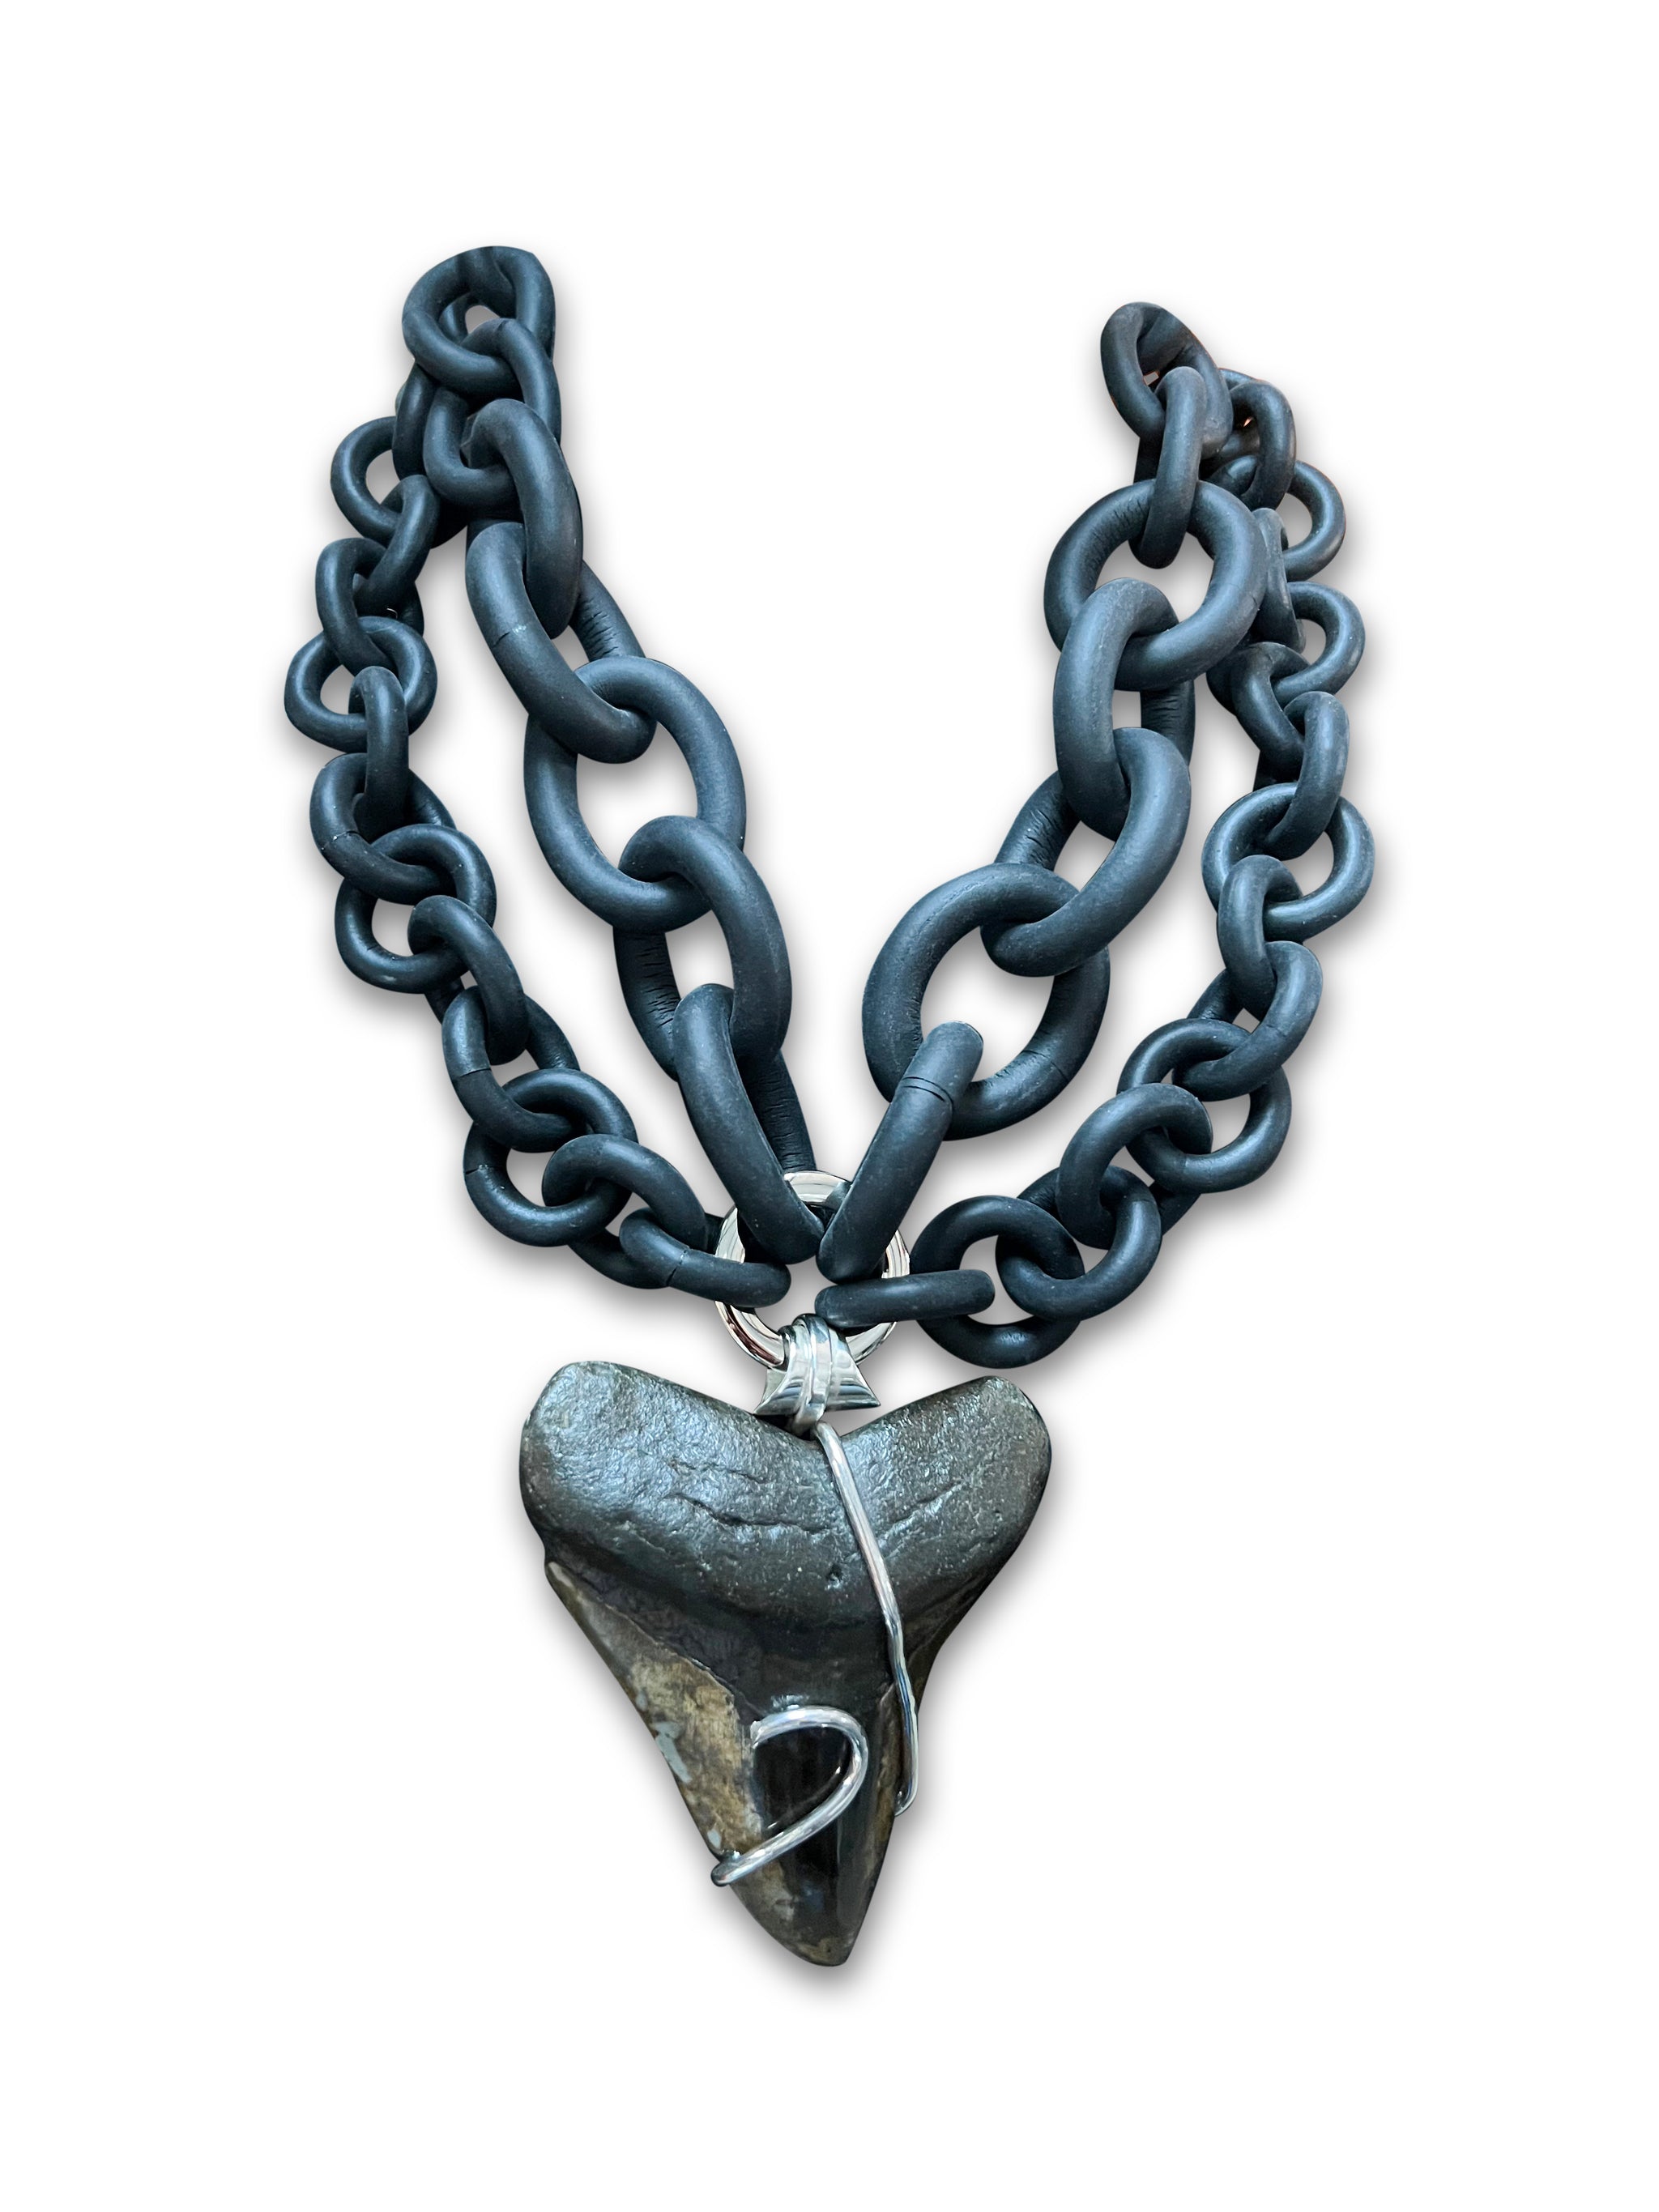 Megalodon Tooth 5-in-1 Rubber Necklace